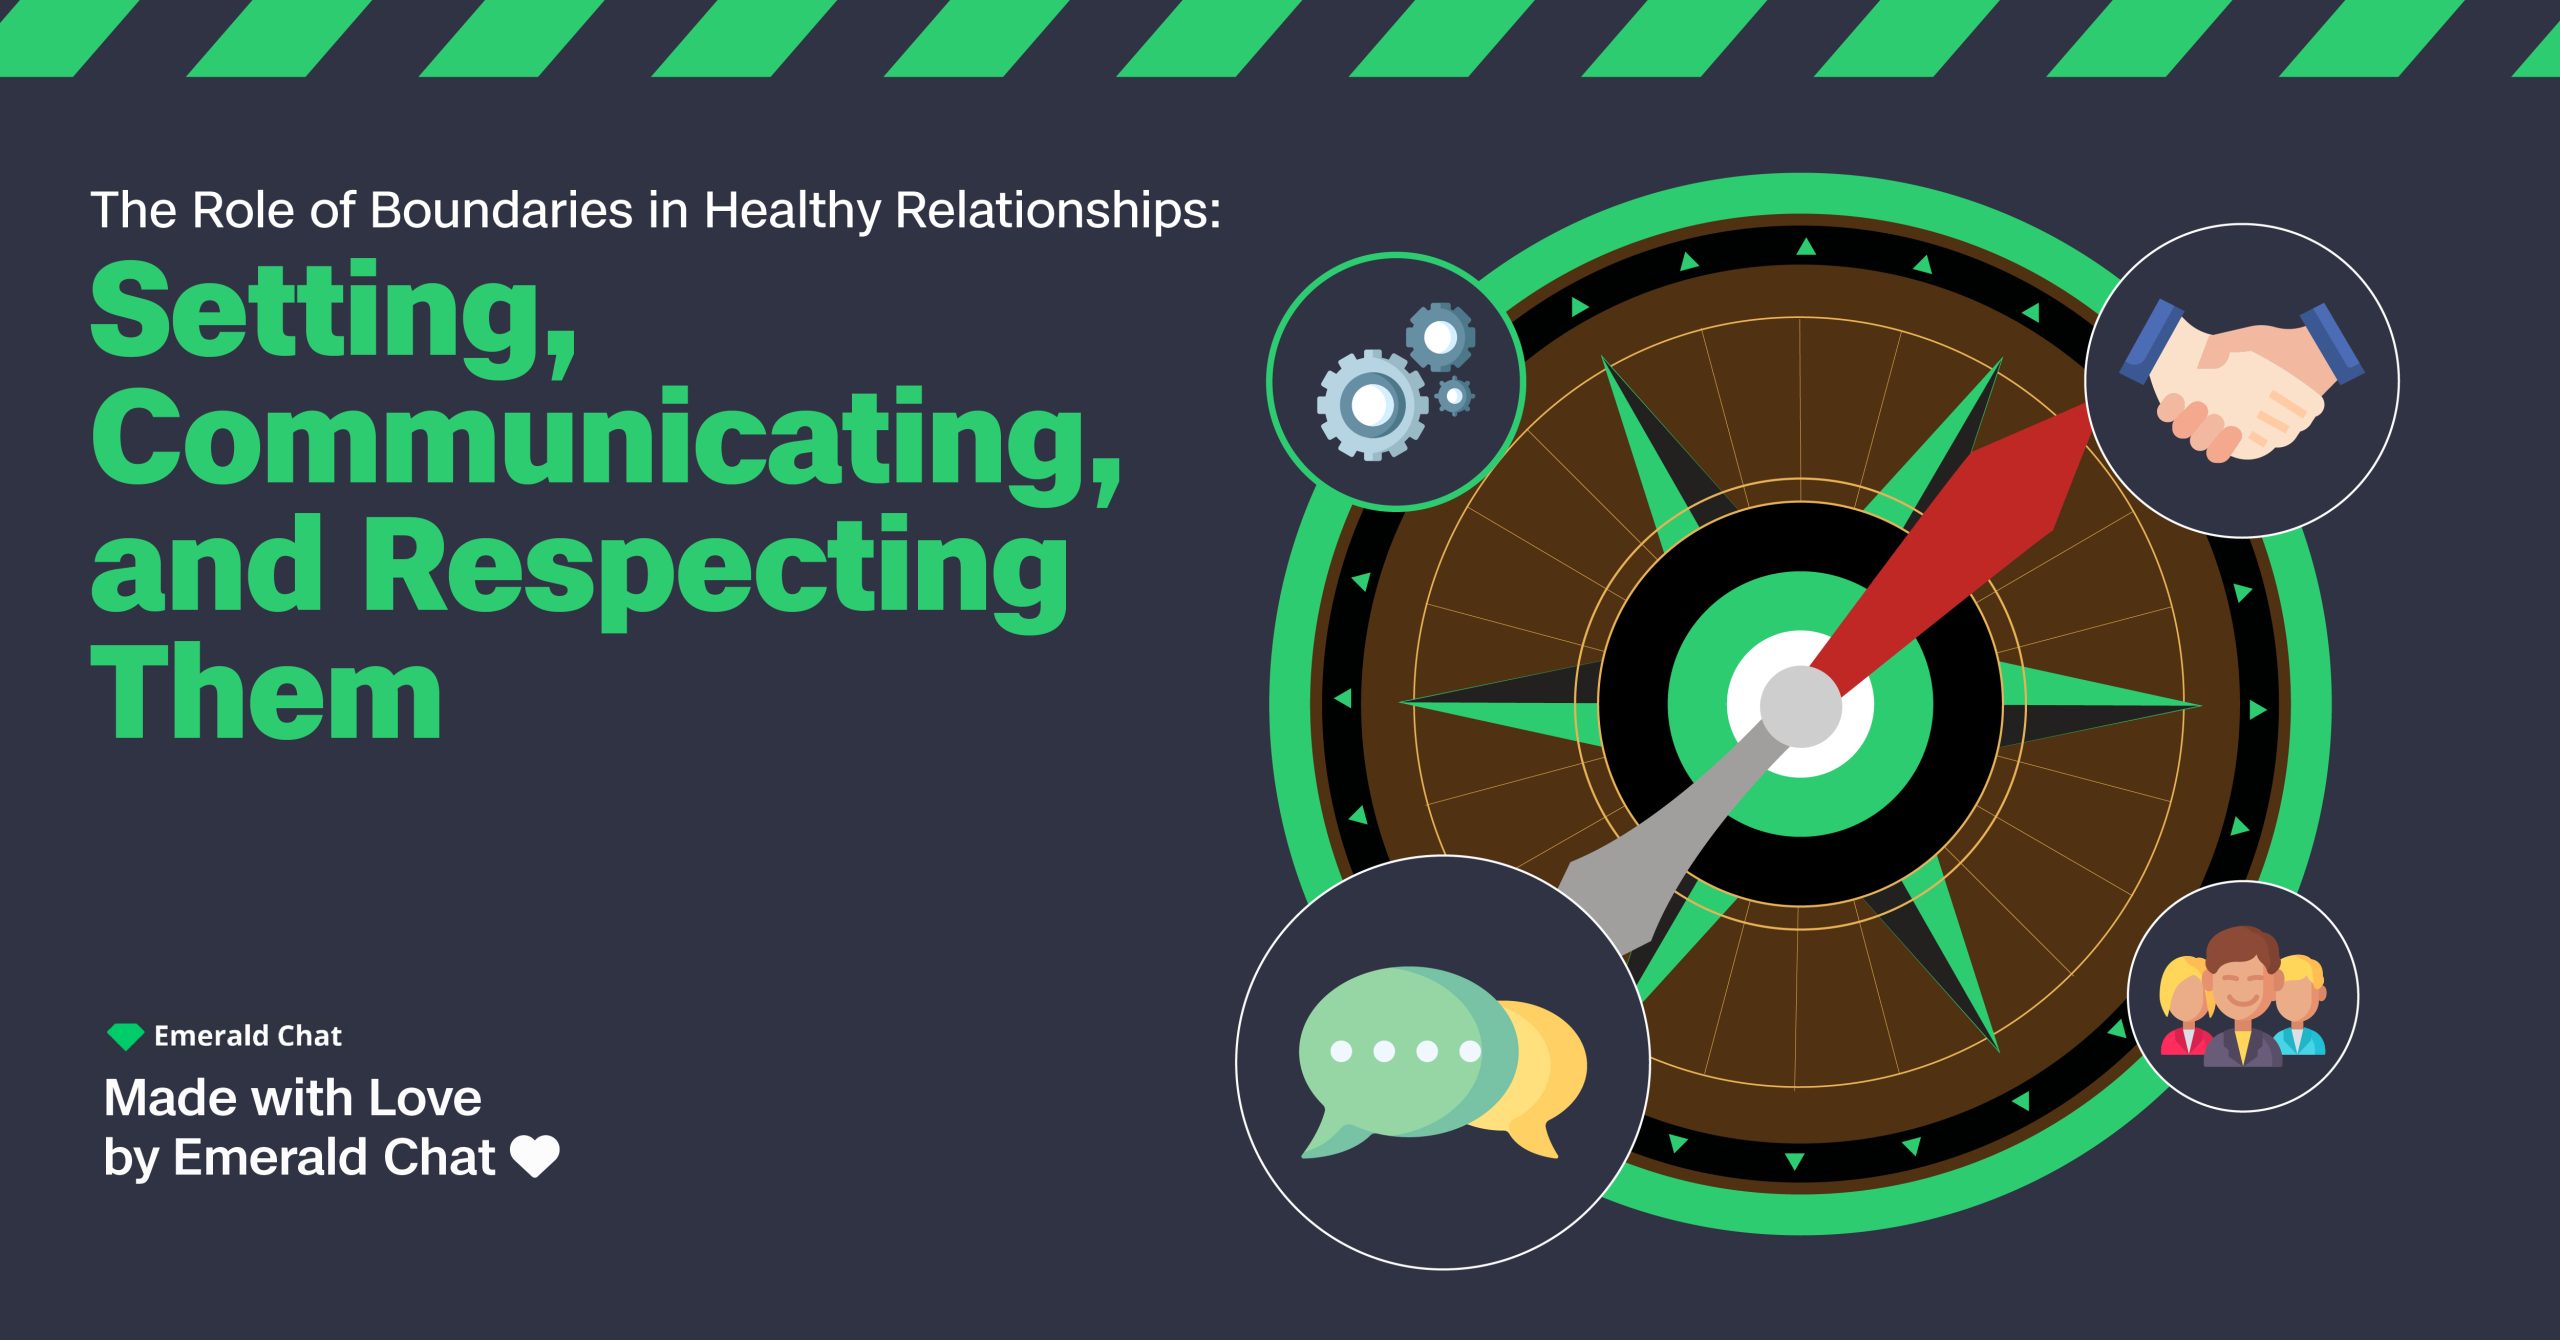 The Role of Boundaries in Healthy Relationships: Setting, Communicating, and Respecting Them